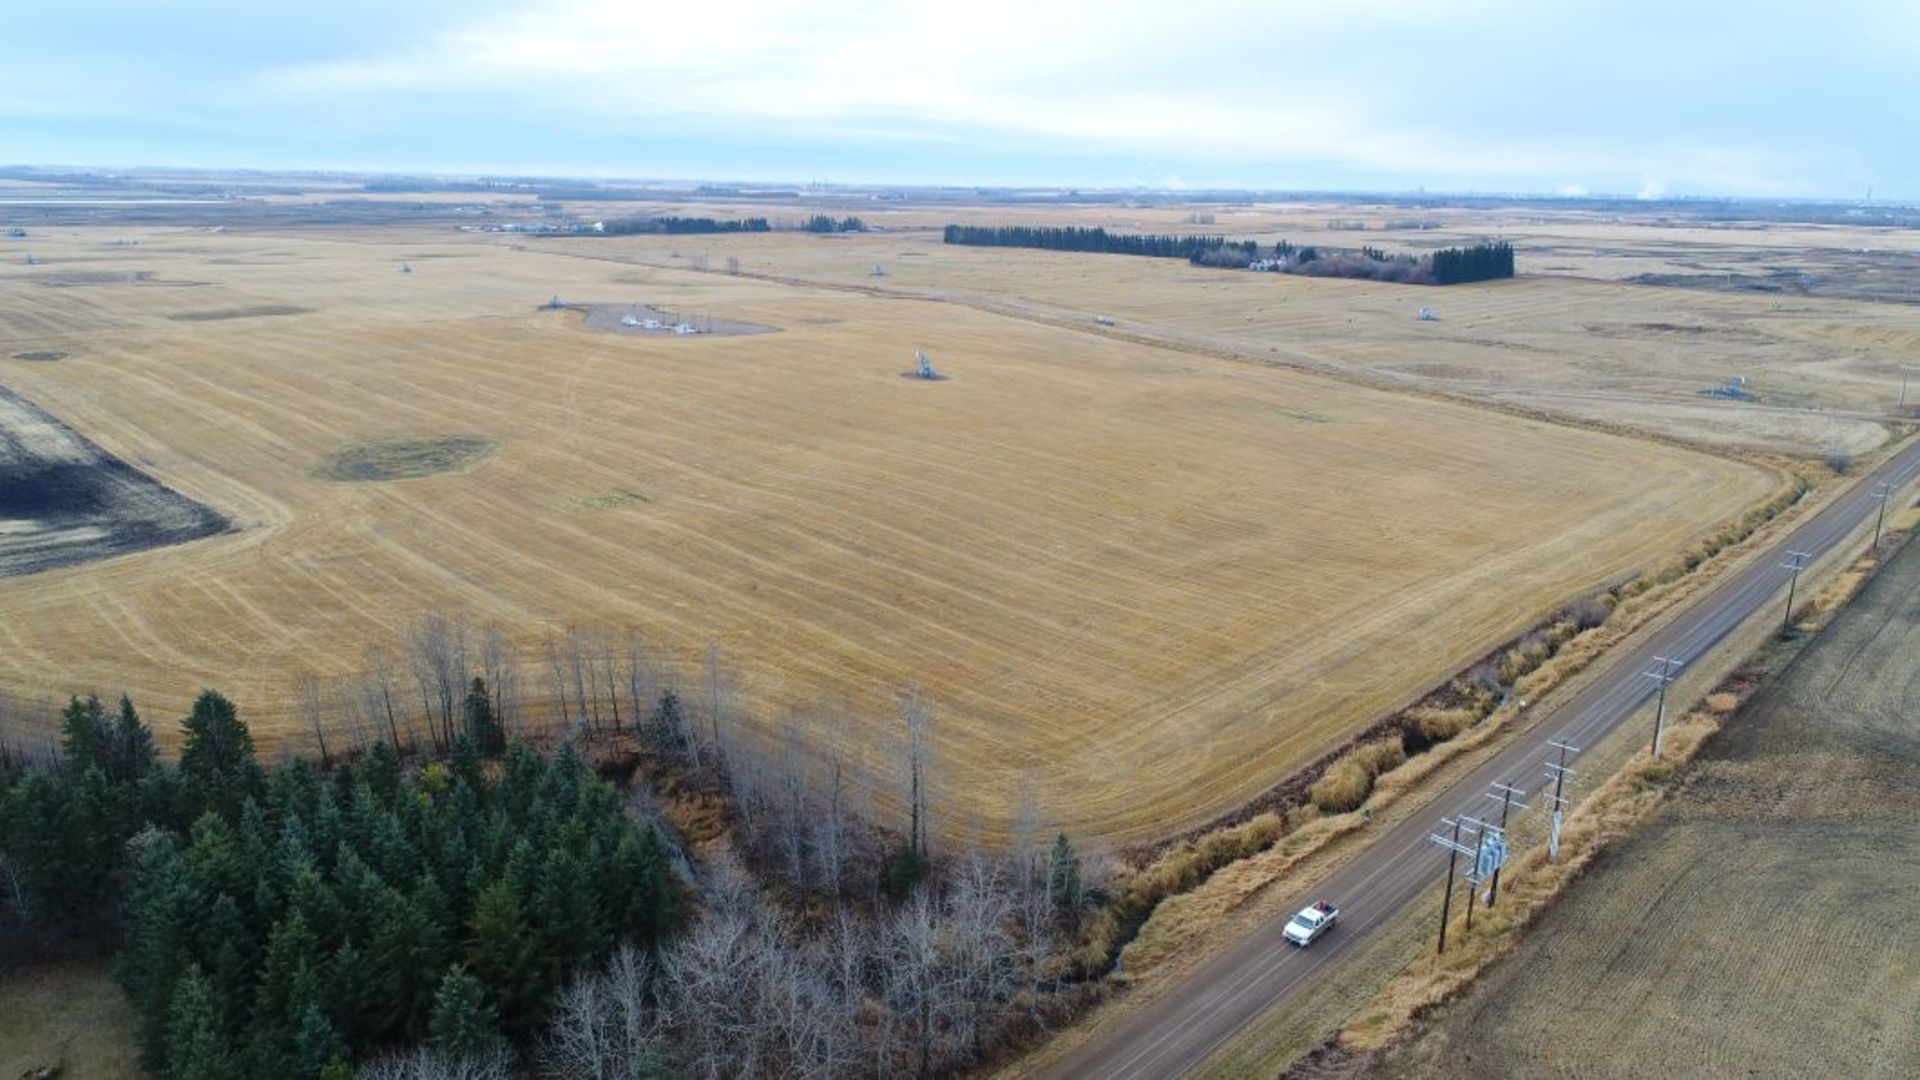 160+/- Total Acres NW 8-56-20-W4, Bruderheim, AB, consisting of Crop Land, Surface Lease & Yard Site - Image 20 of 34